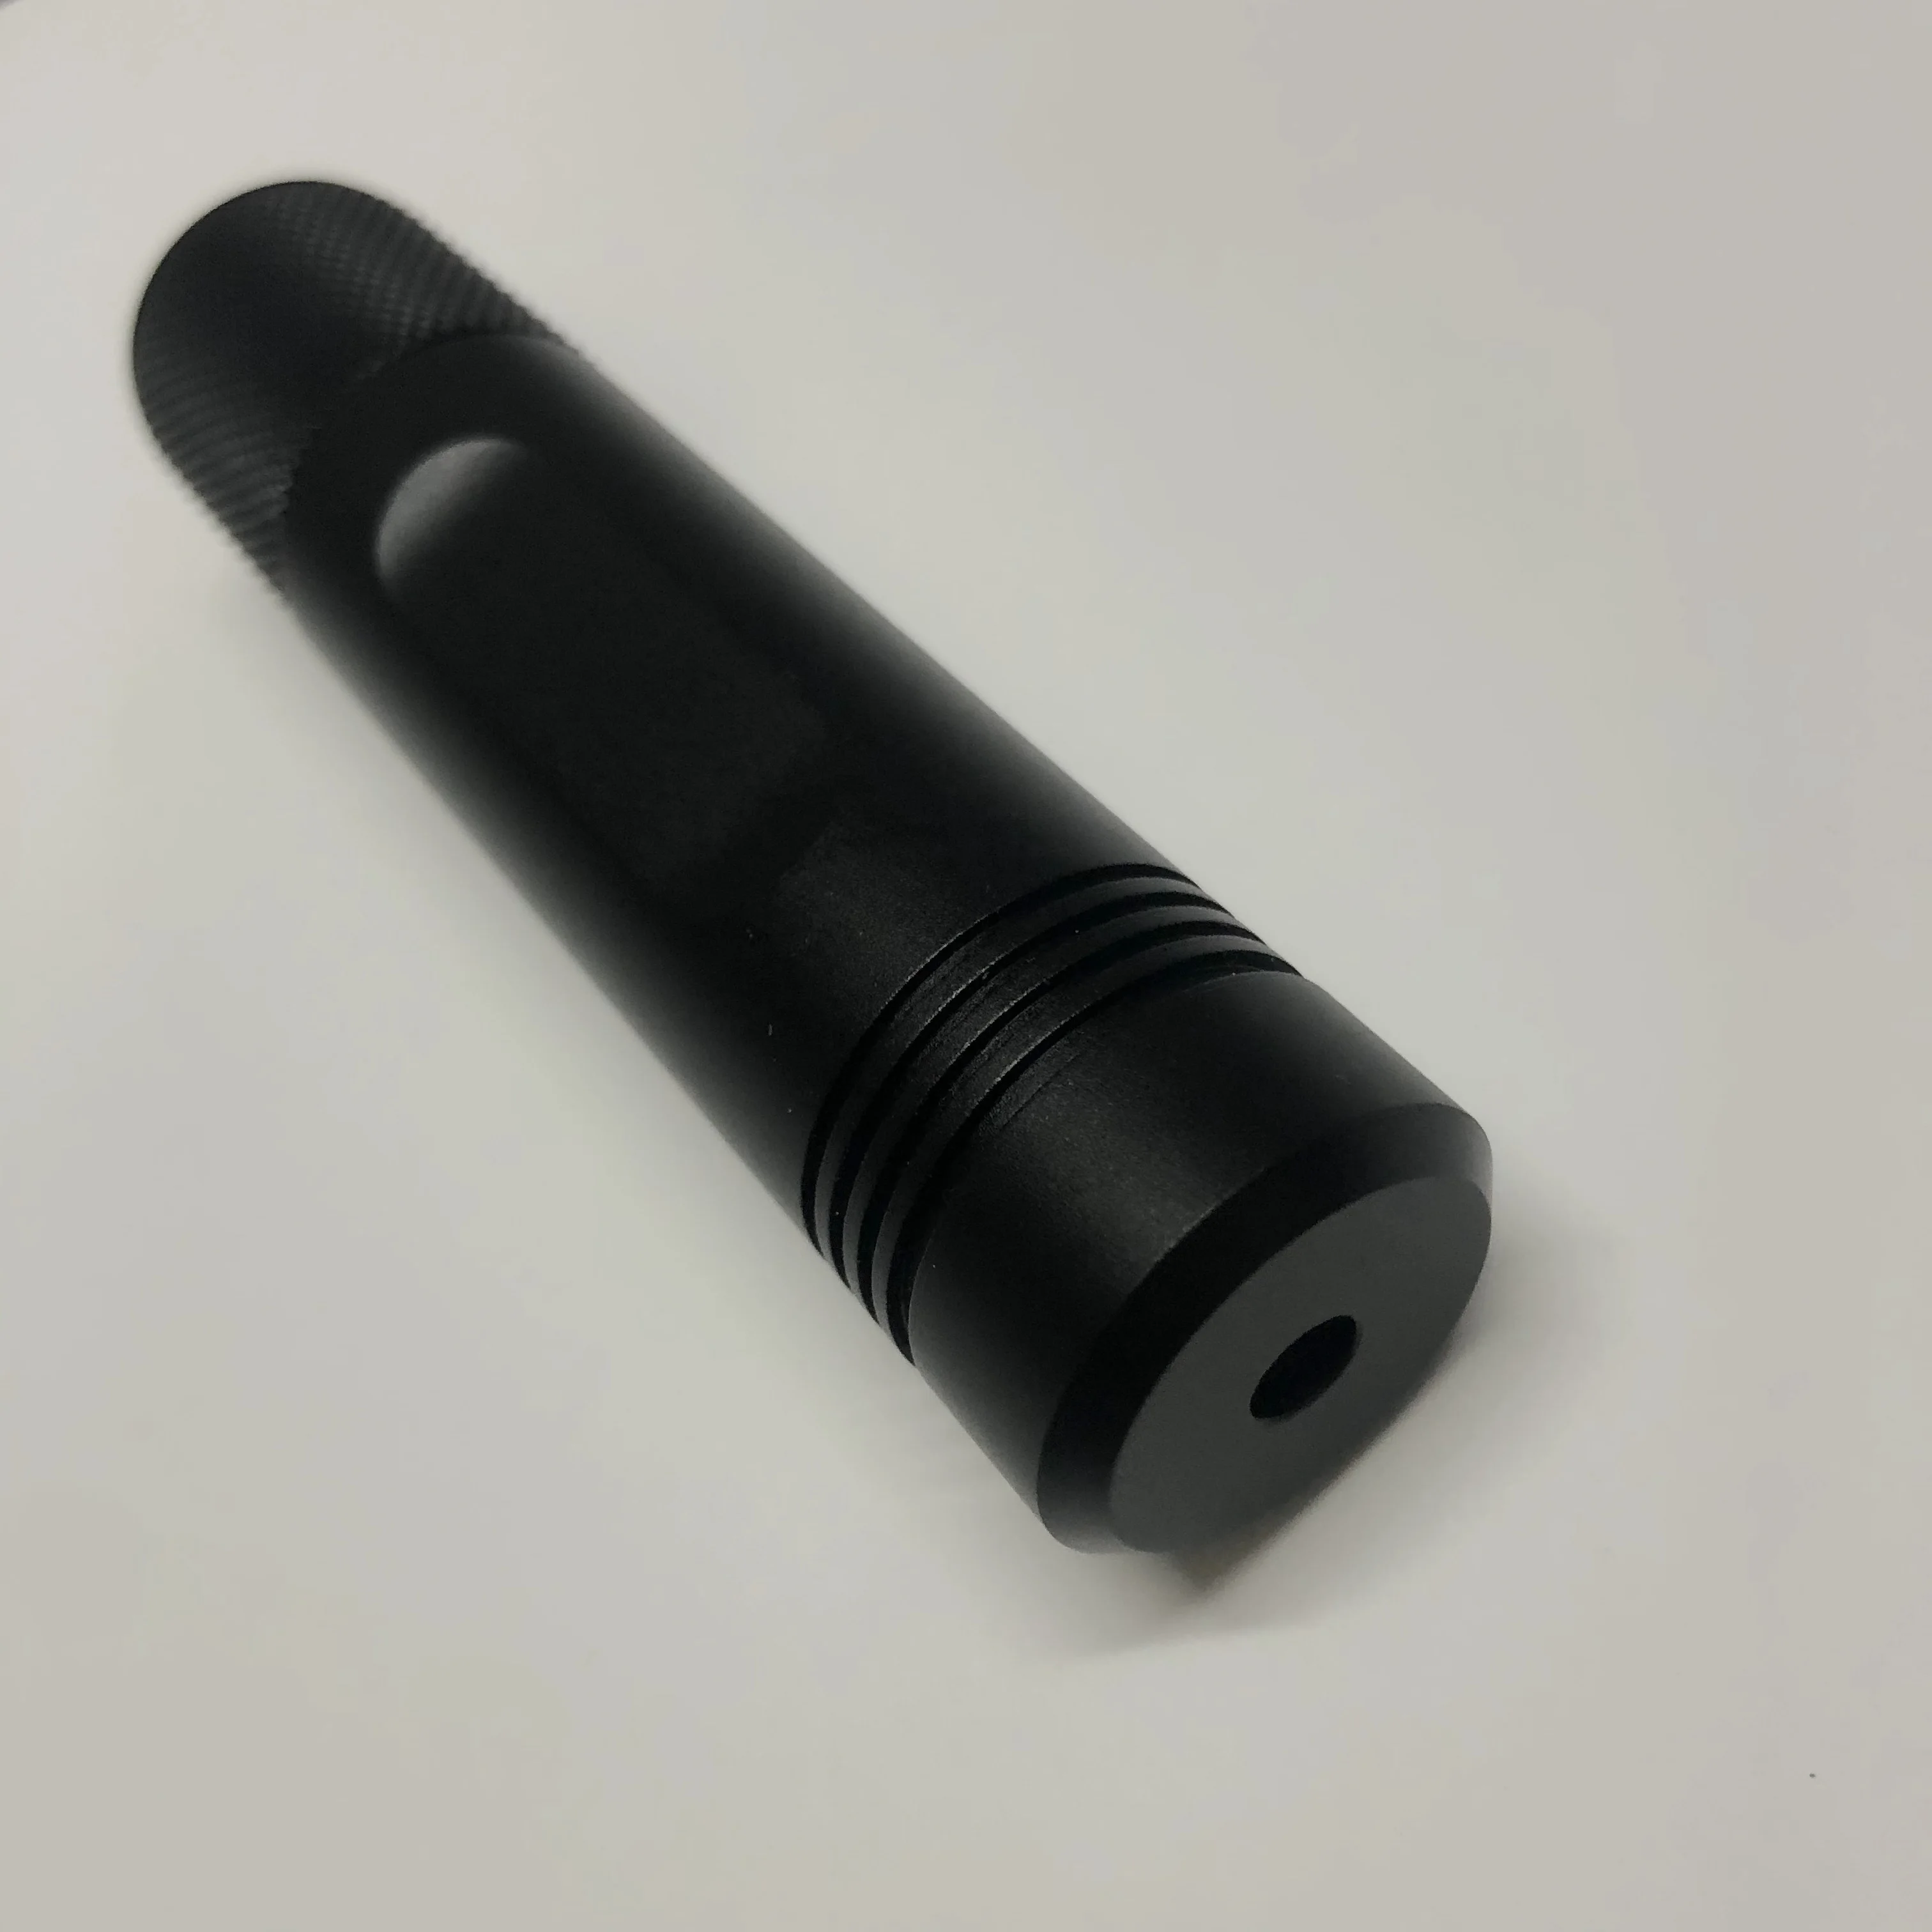 Powerful Green laser pointer 515nm 5mw CR123A battery for outdoor astronomy laser pointer and presentation